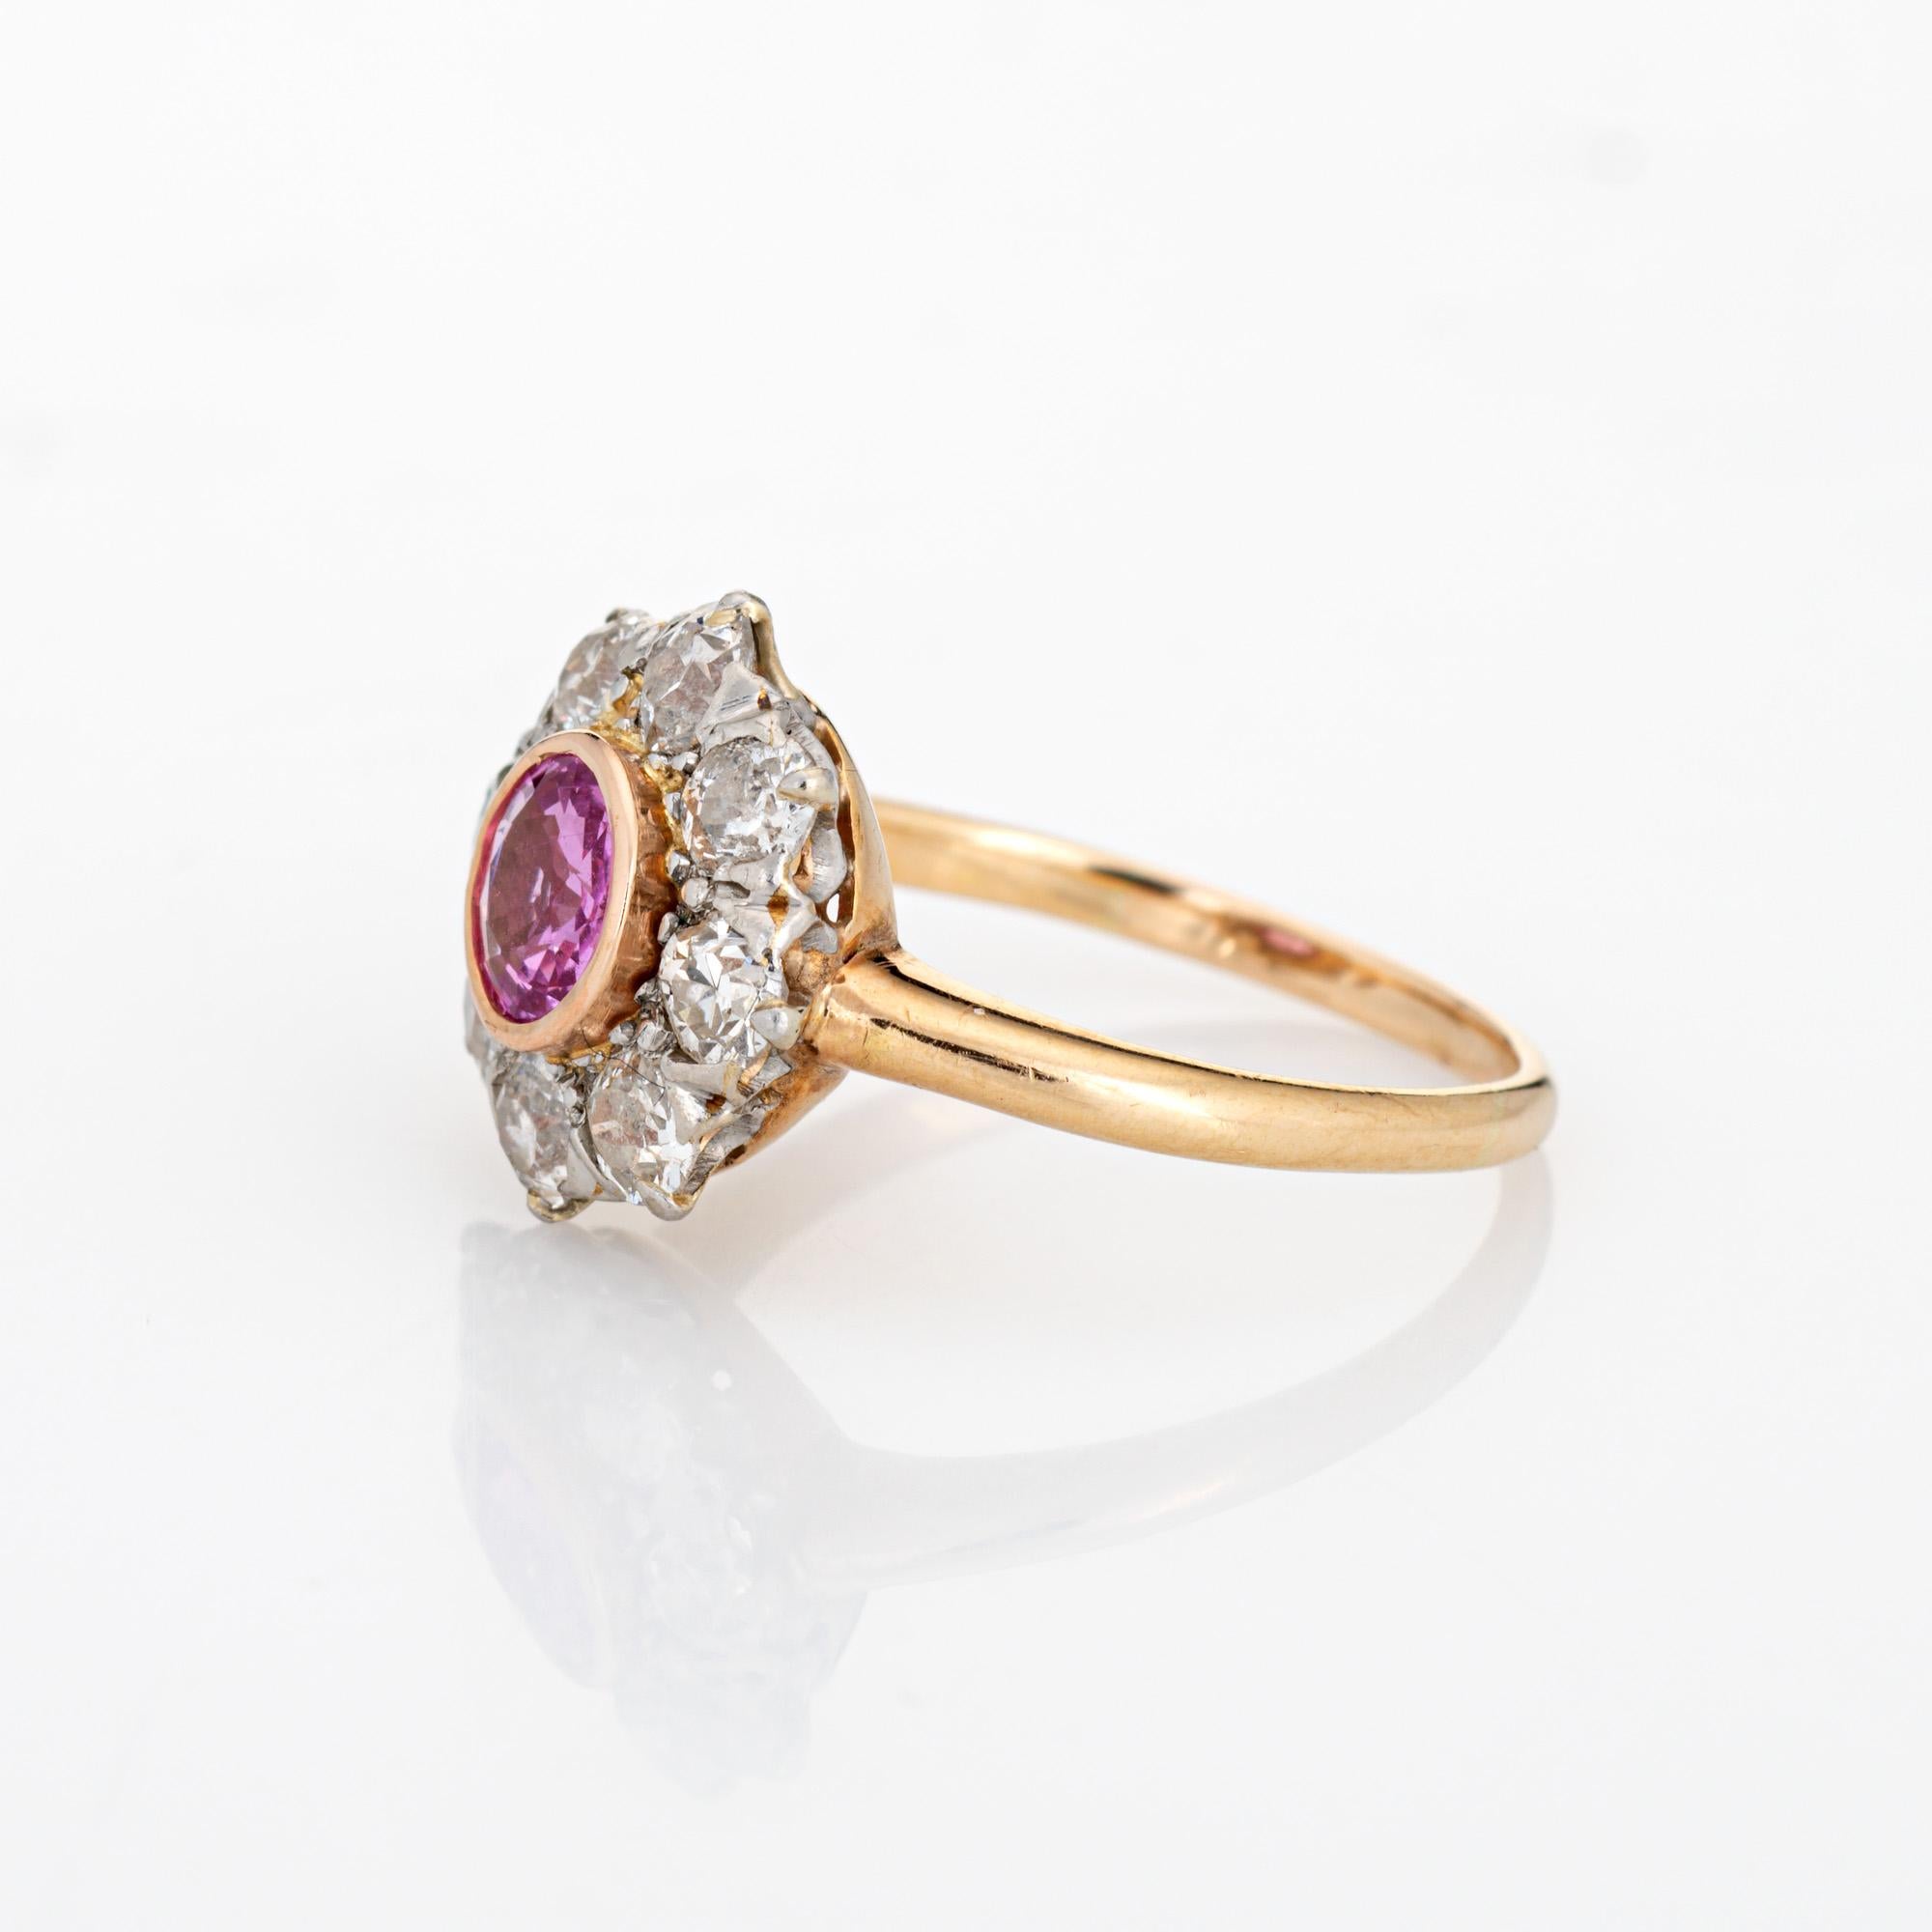 Antique Edwardian Pink Sapphire Diamond Ring Cluster 14k Gold Engagement Bridal In Good Condition For Sale In Torrance, CA